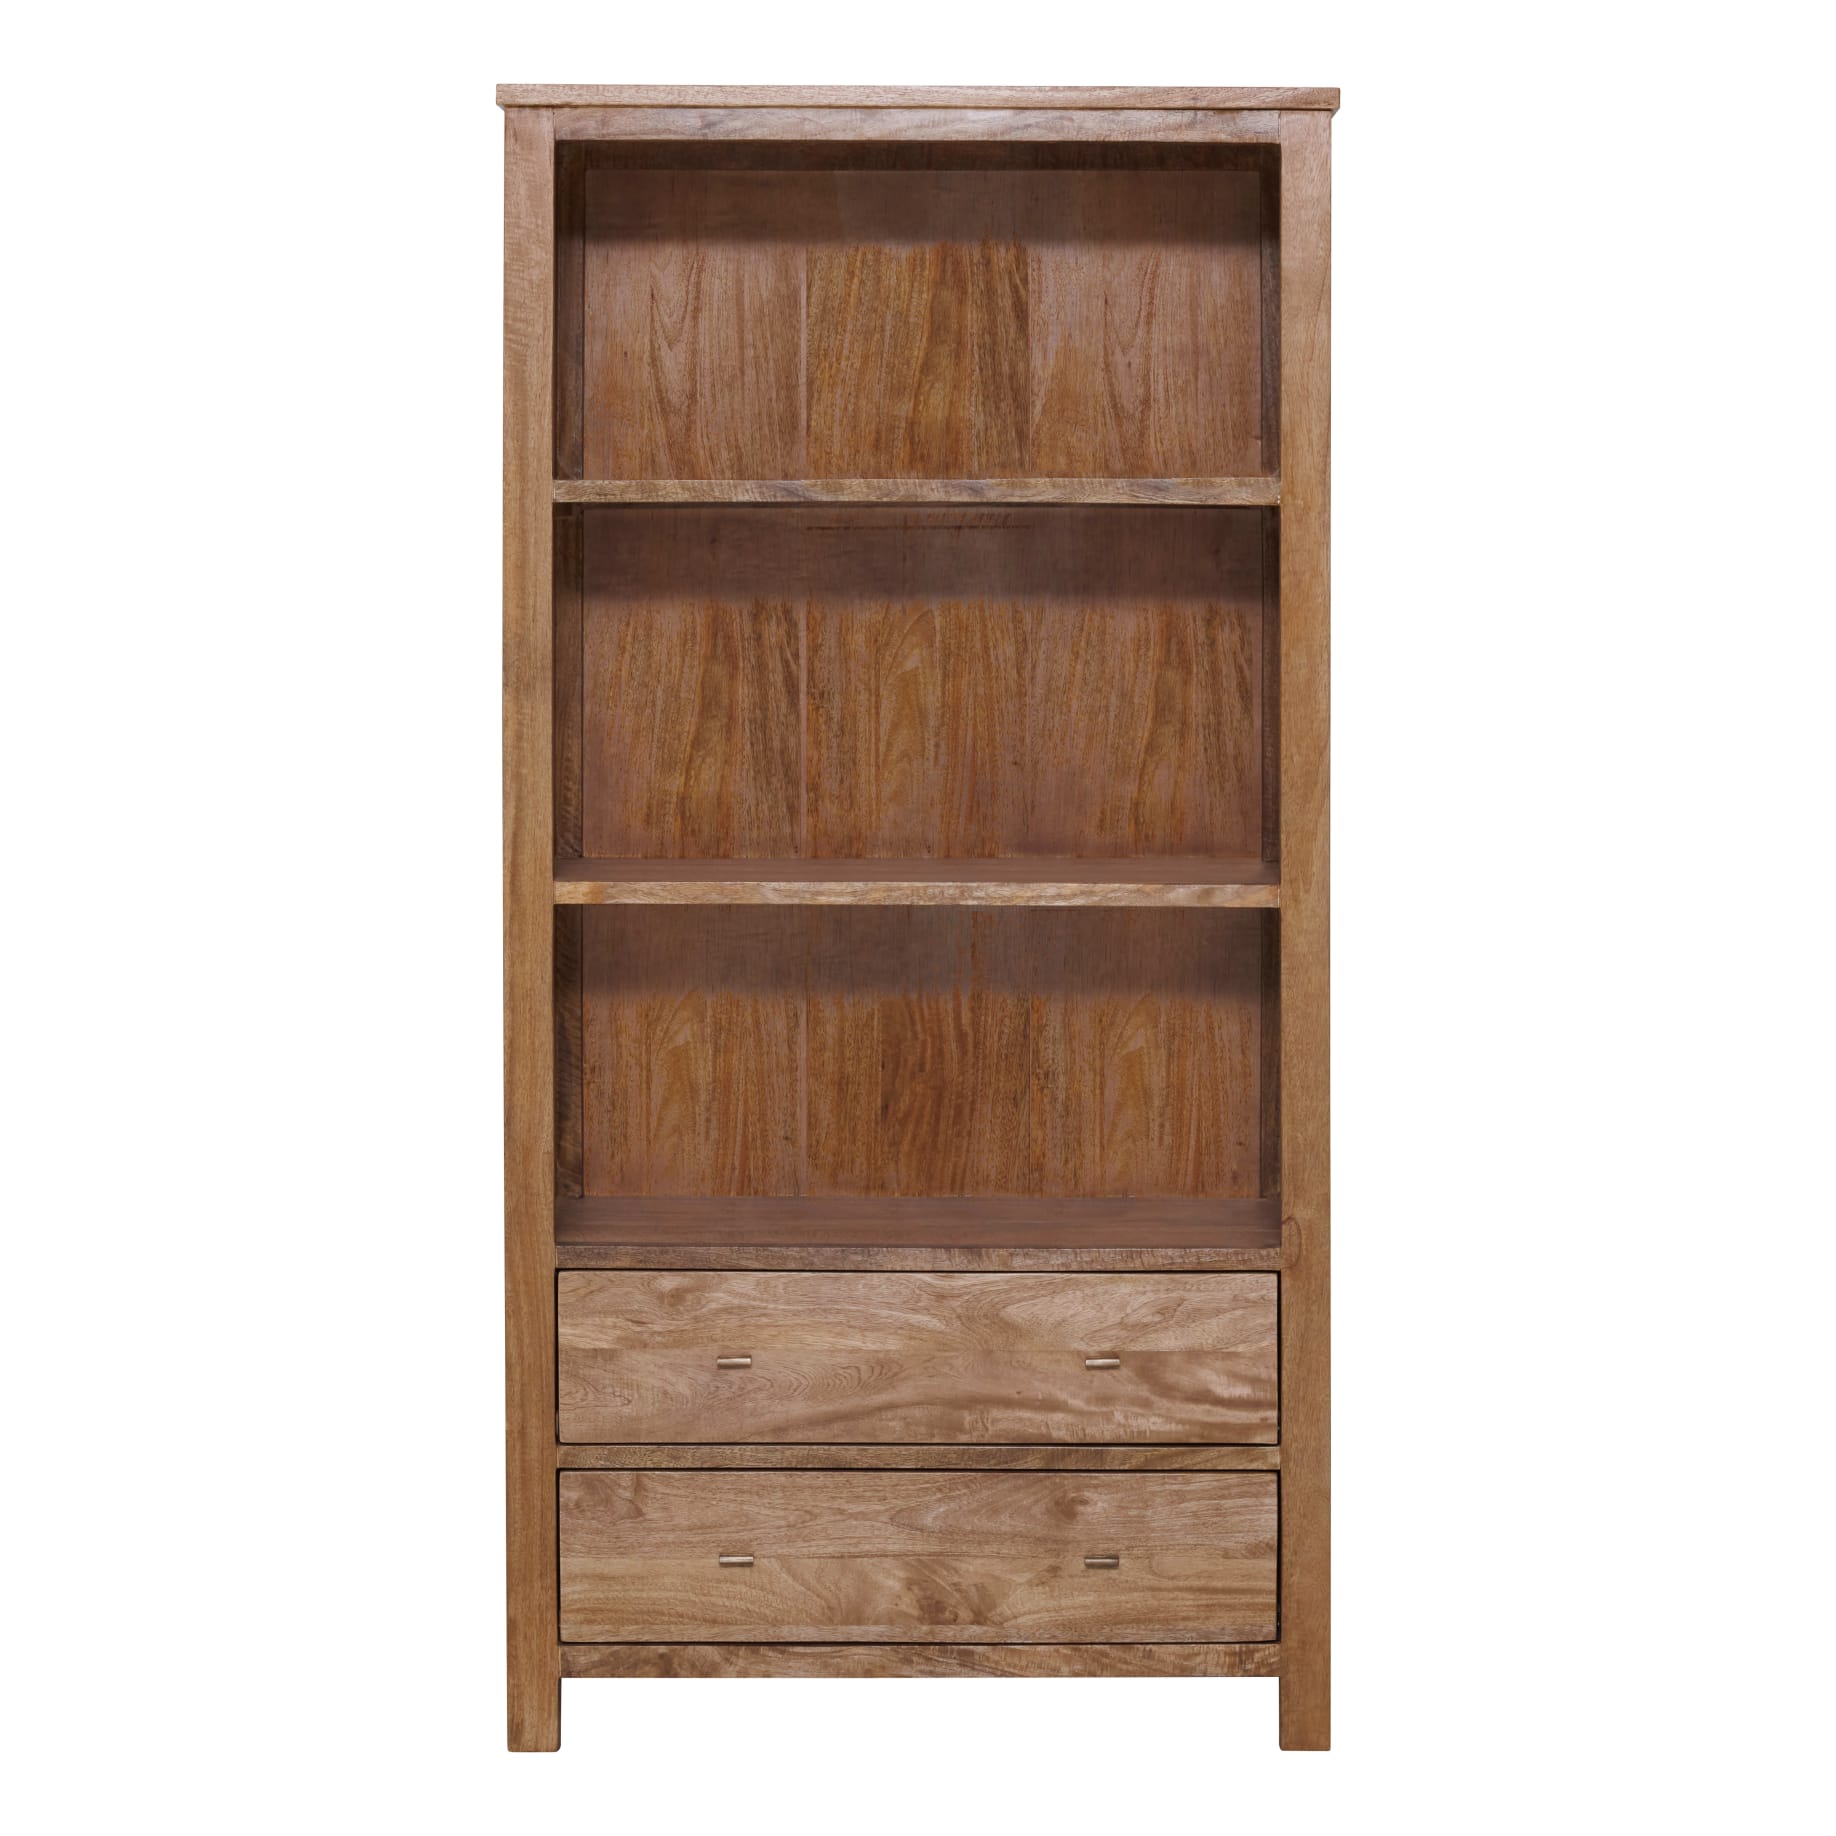 Sorrento Shelf Unit in Mangowood Havana with Solid Back